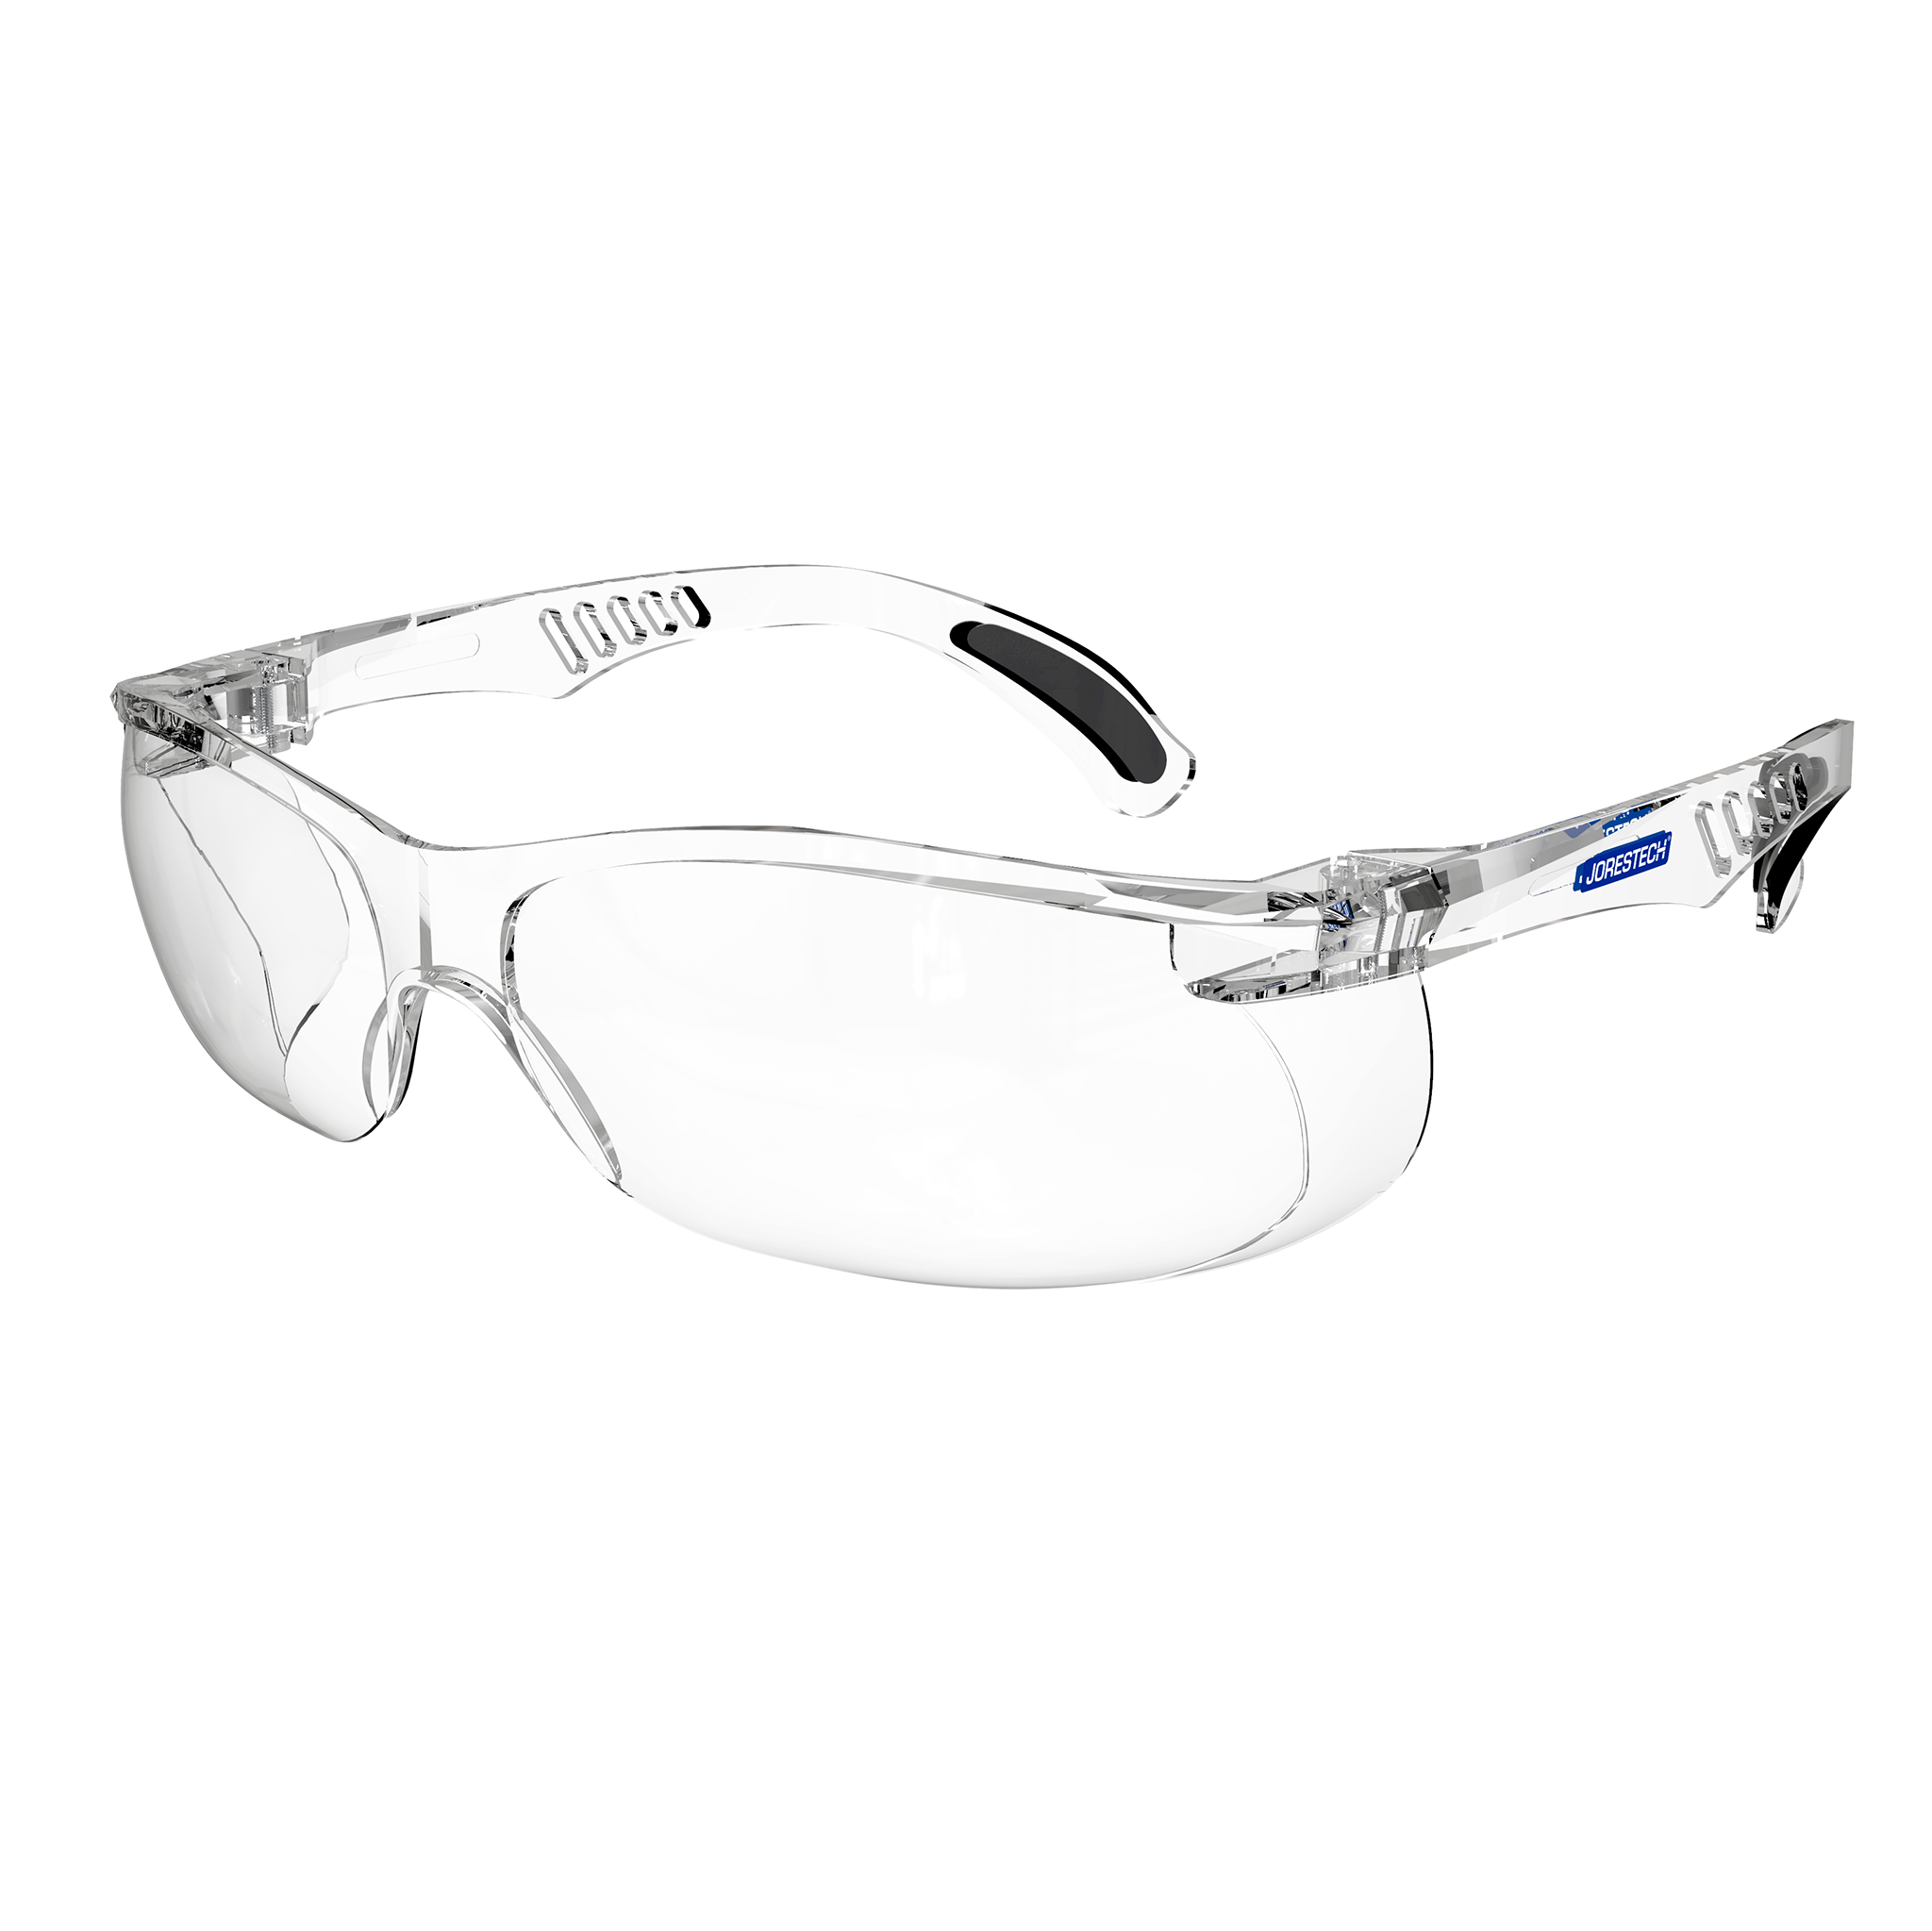 Safe Handler Green, Crystal Clear Lens Color Temple Safety glasses  (36-Pairs) BLSH-ESCR-CLLCT-SG8GR-36 - The Home Depot